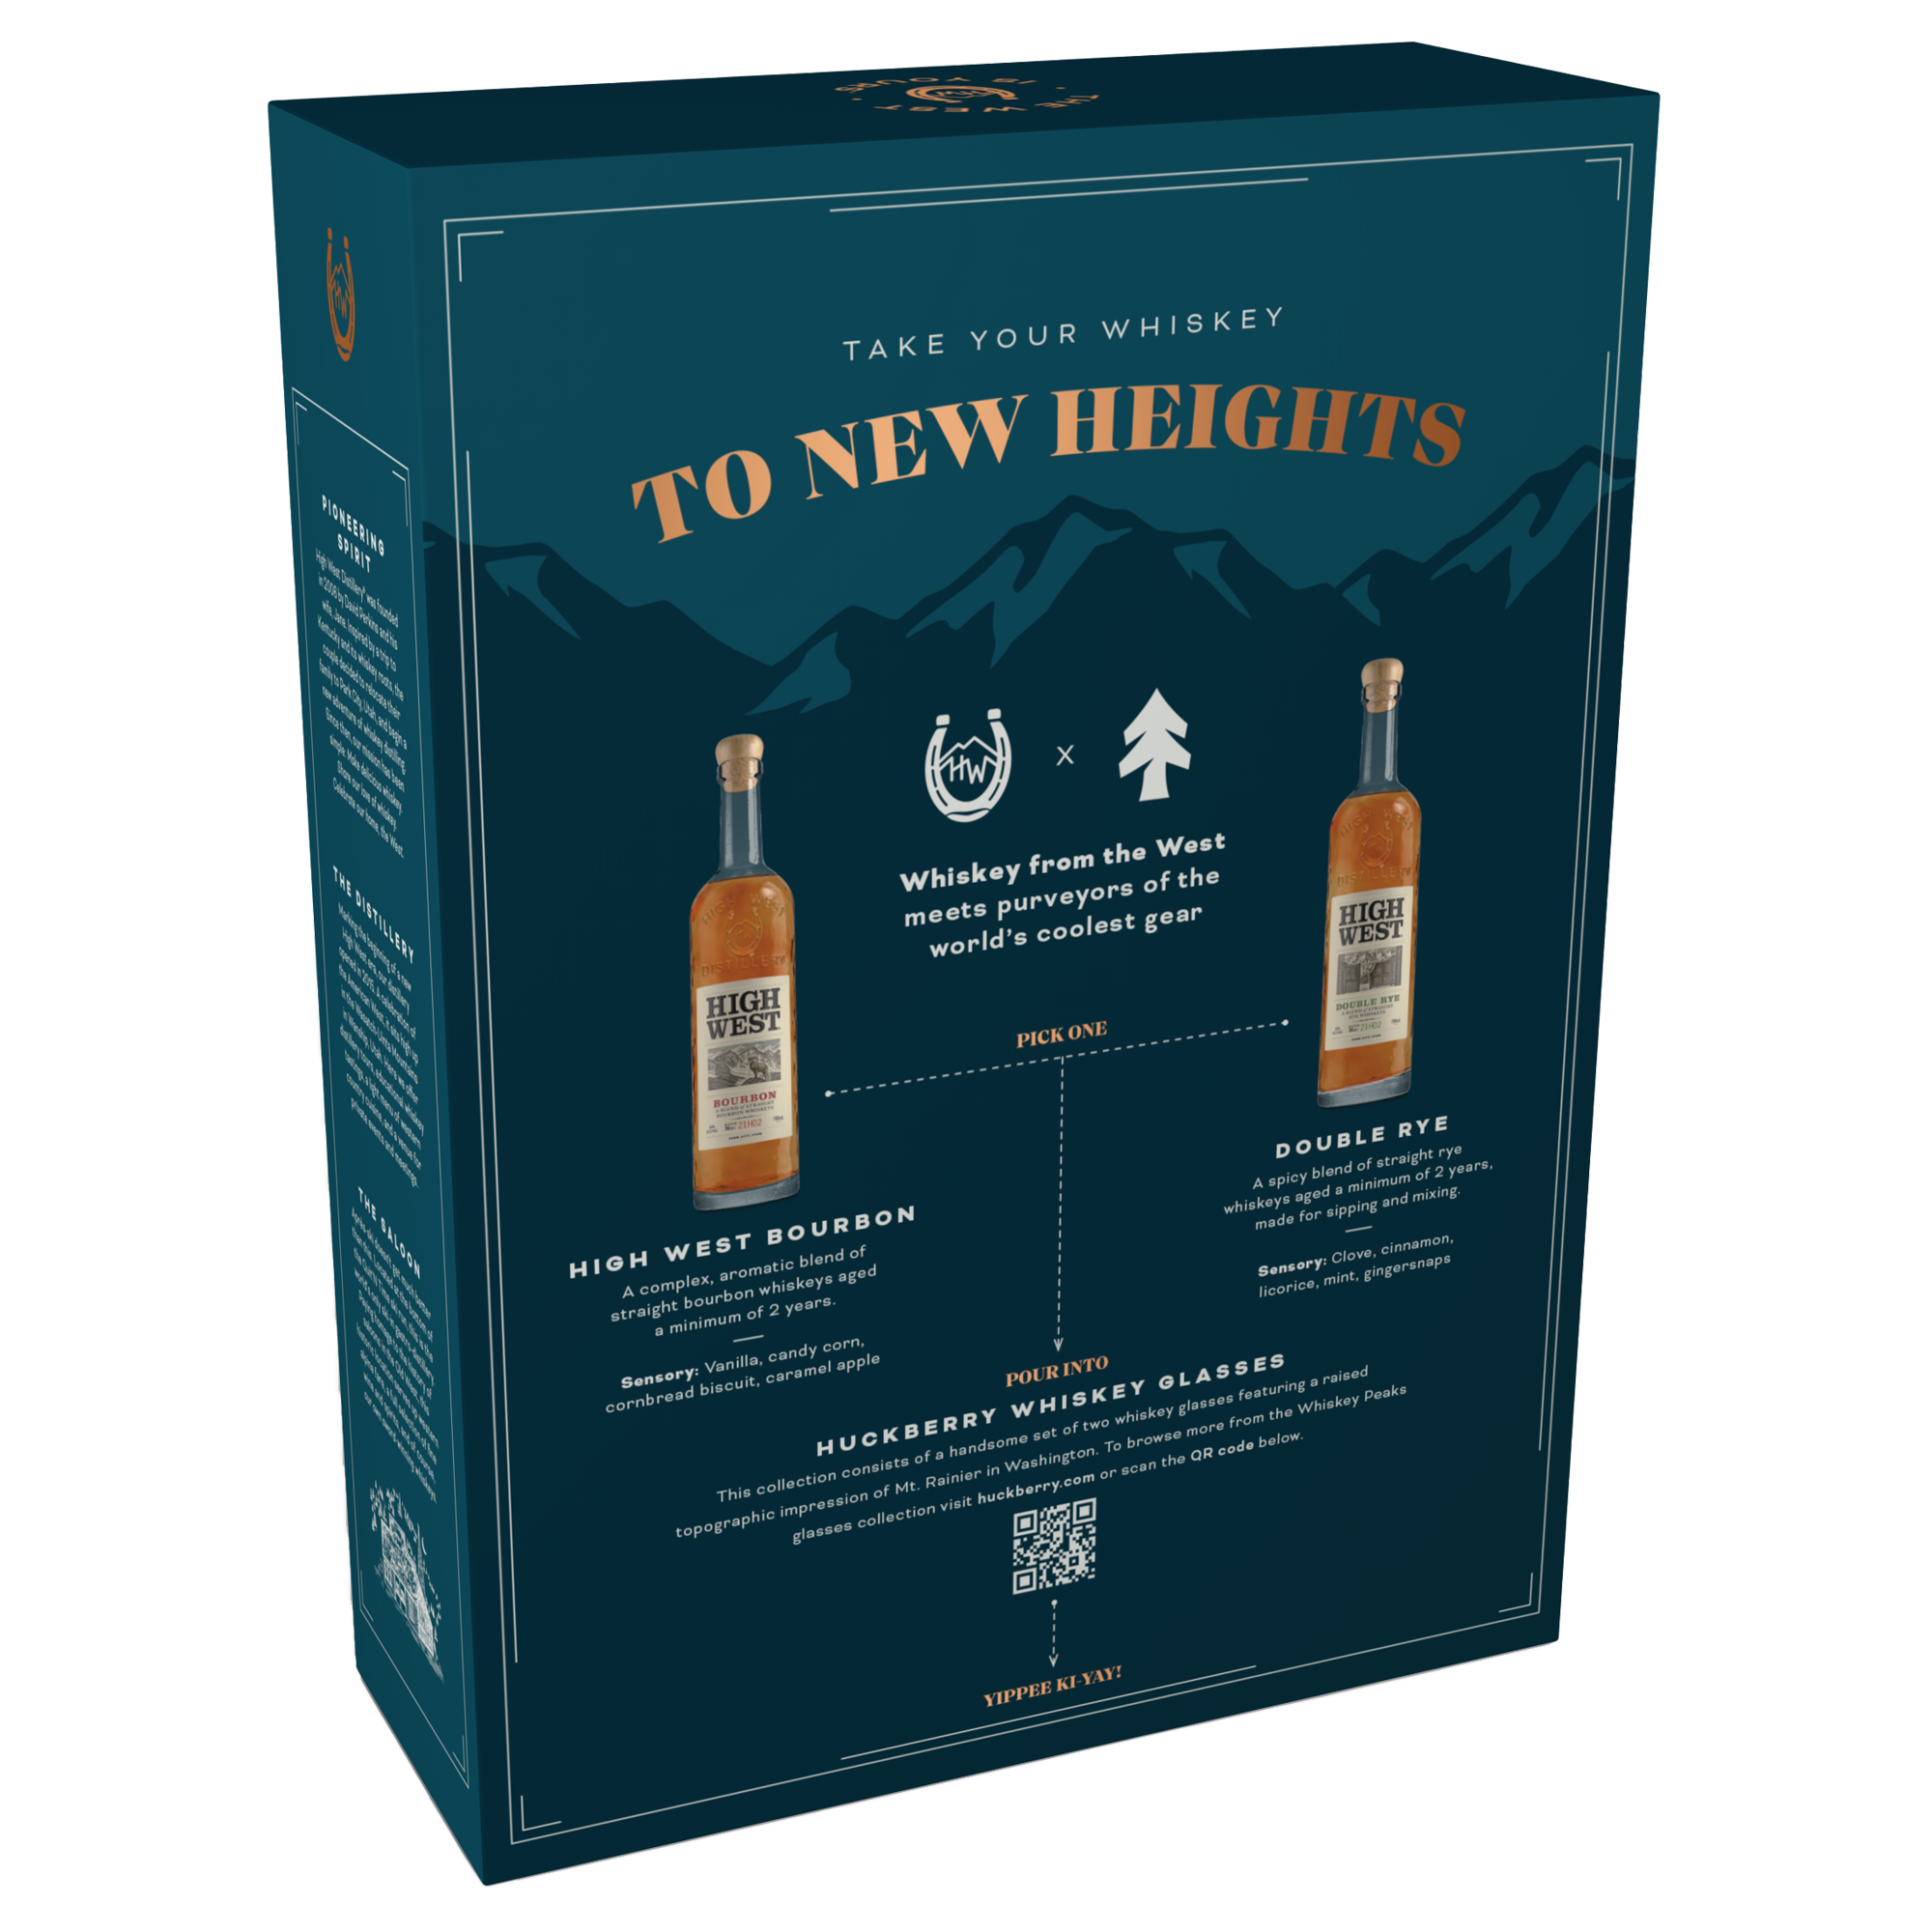 High West Huckberry Holiday Gift Set With 2 Mt. Rainier Whiskey Peaks Glasses - Barbank